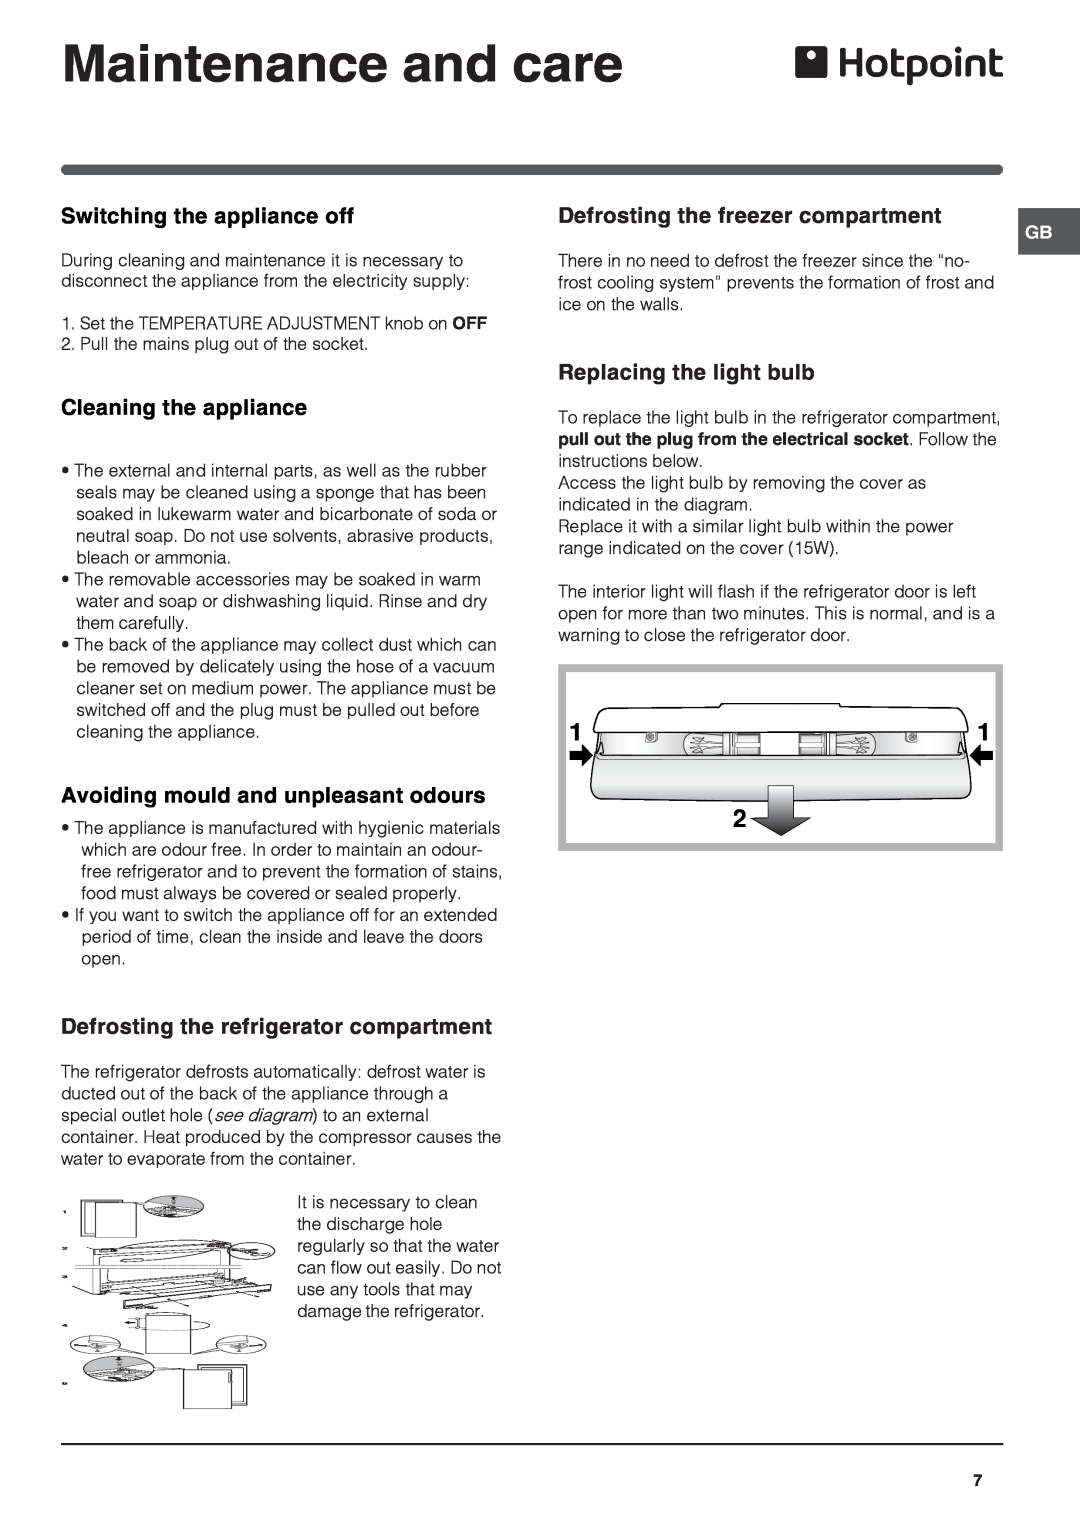 Hotpoint FFP187MG manual Maintenance and care, Switching the appliance off, Defrosting the freezer compartment 